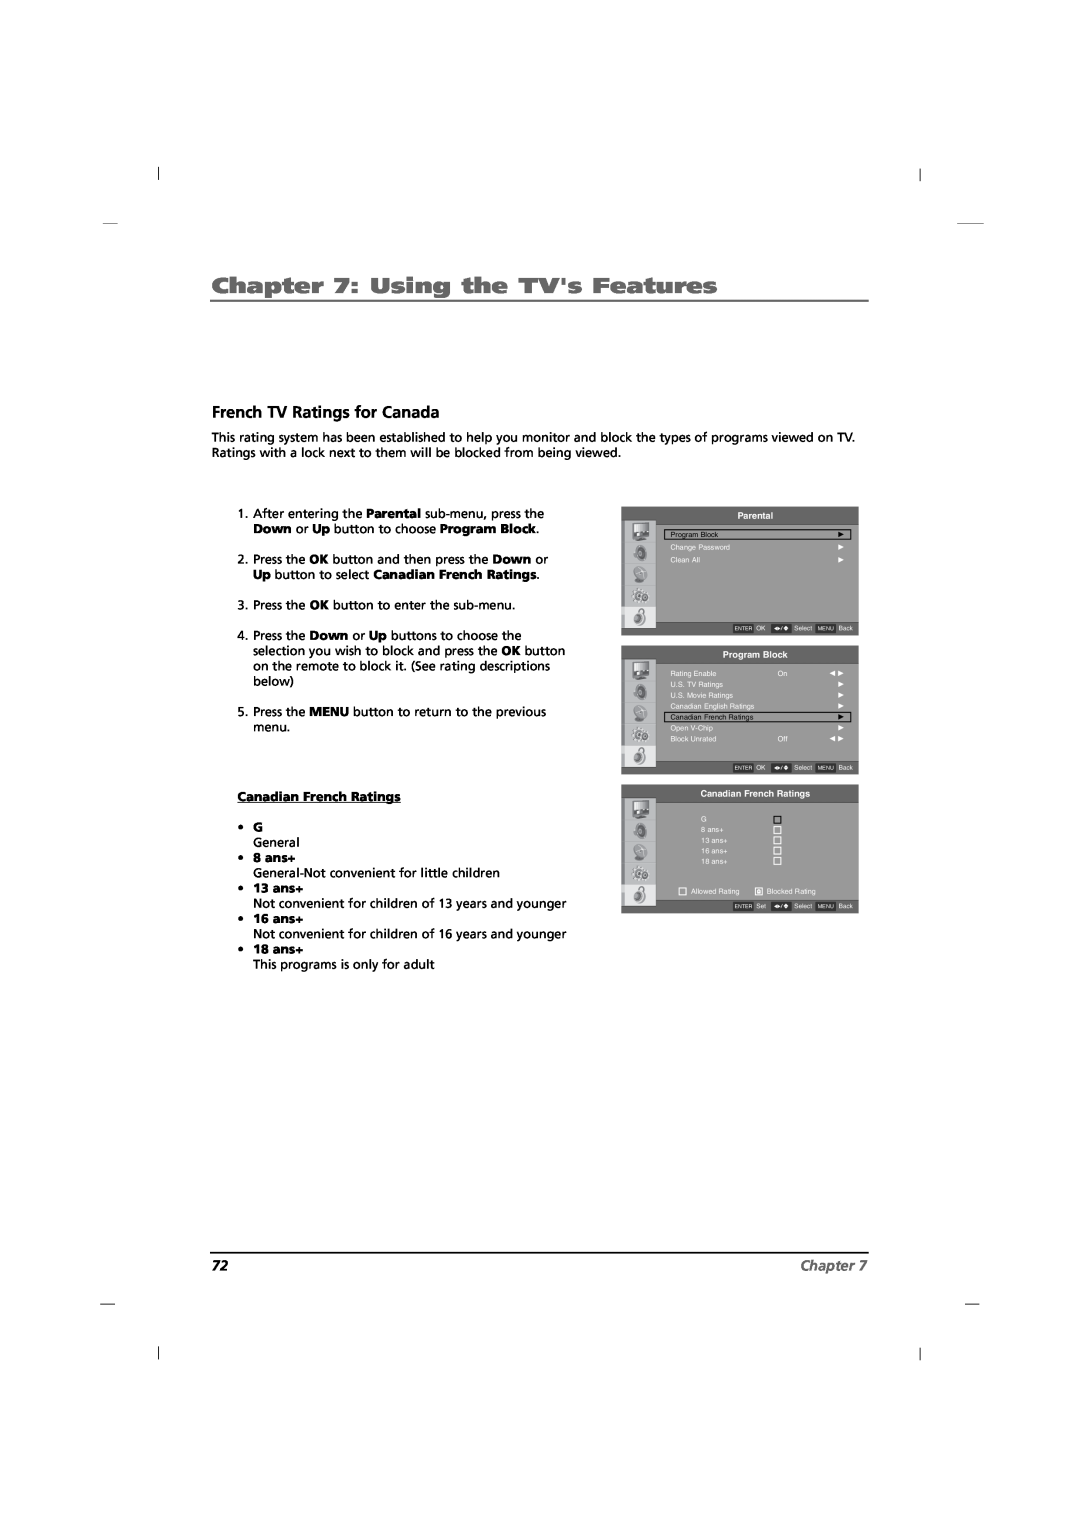 RCA J42CE820, J32CE720, J26CE820 manual French TV Ratings for Canada, Using the TVs Features, Chapter 